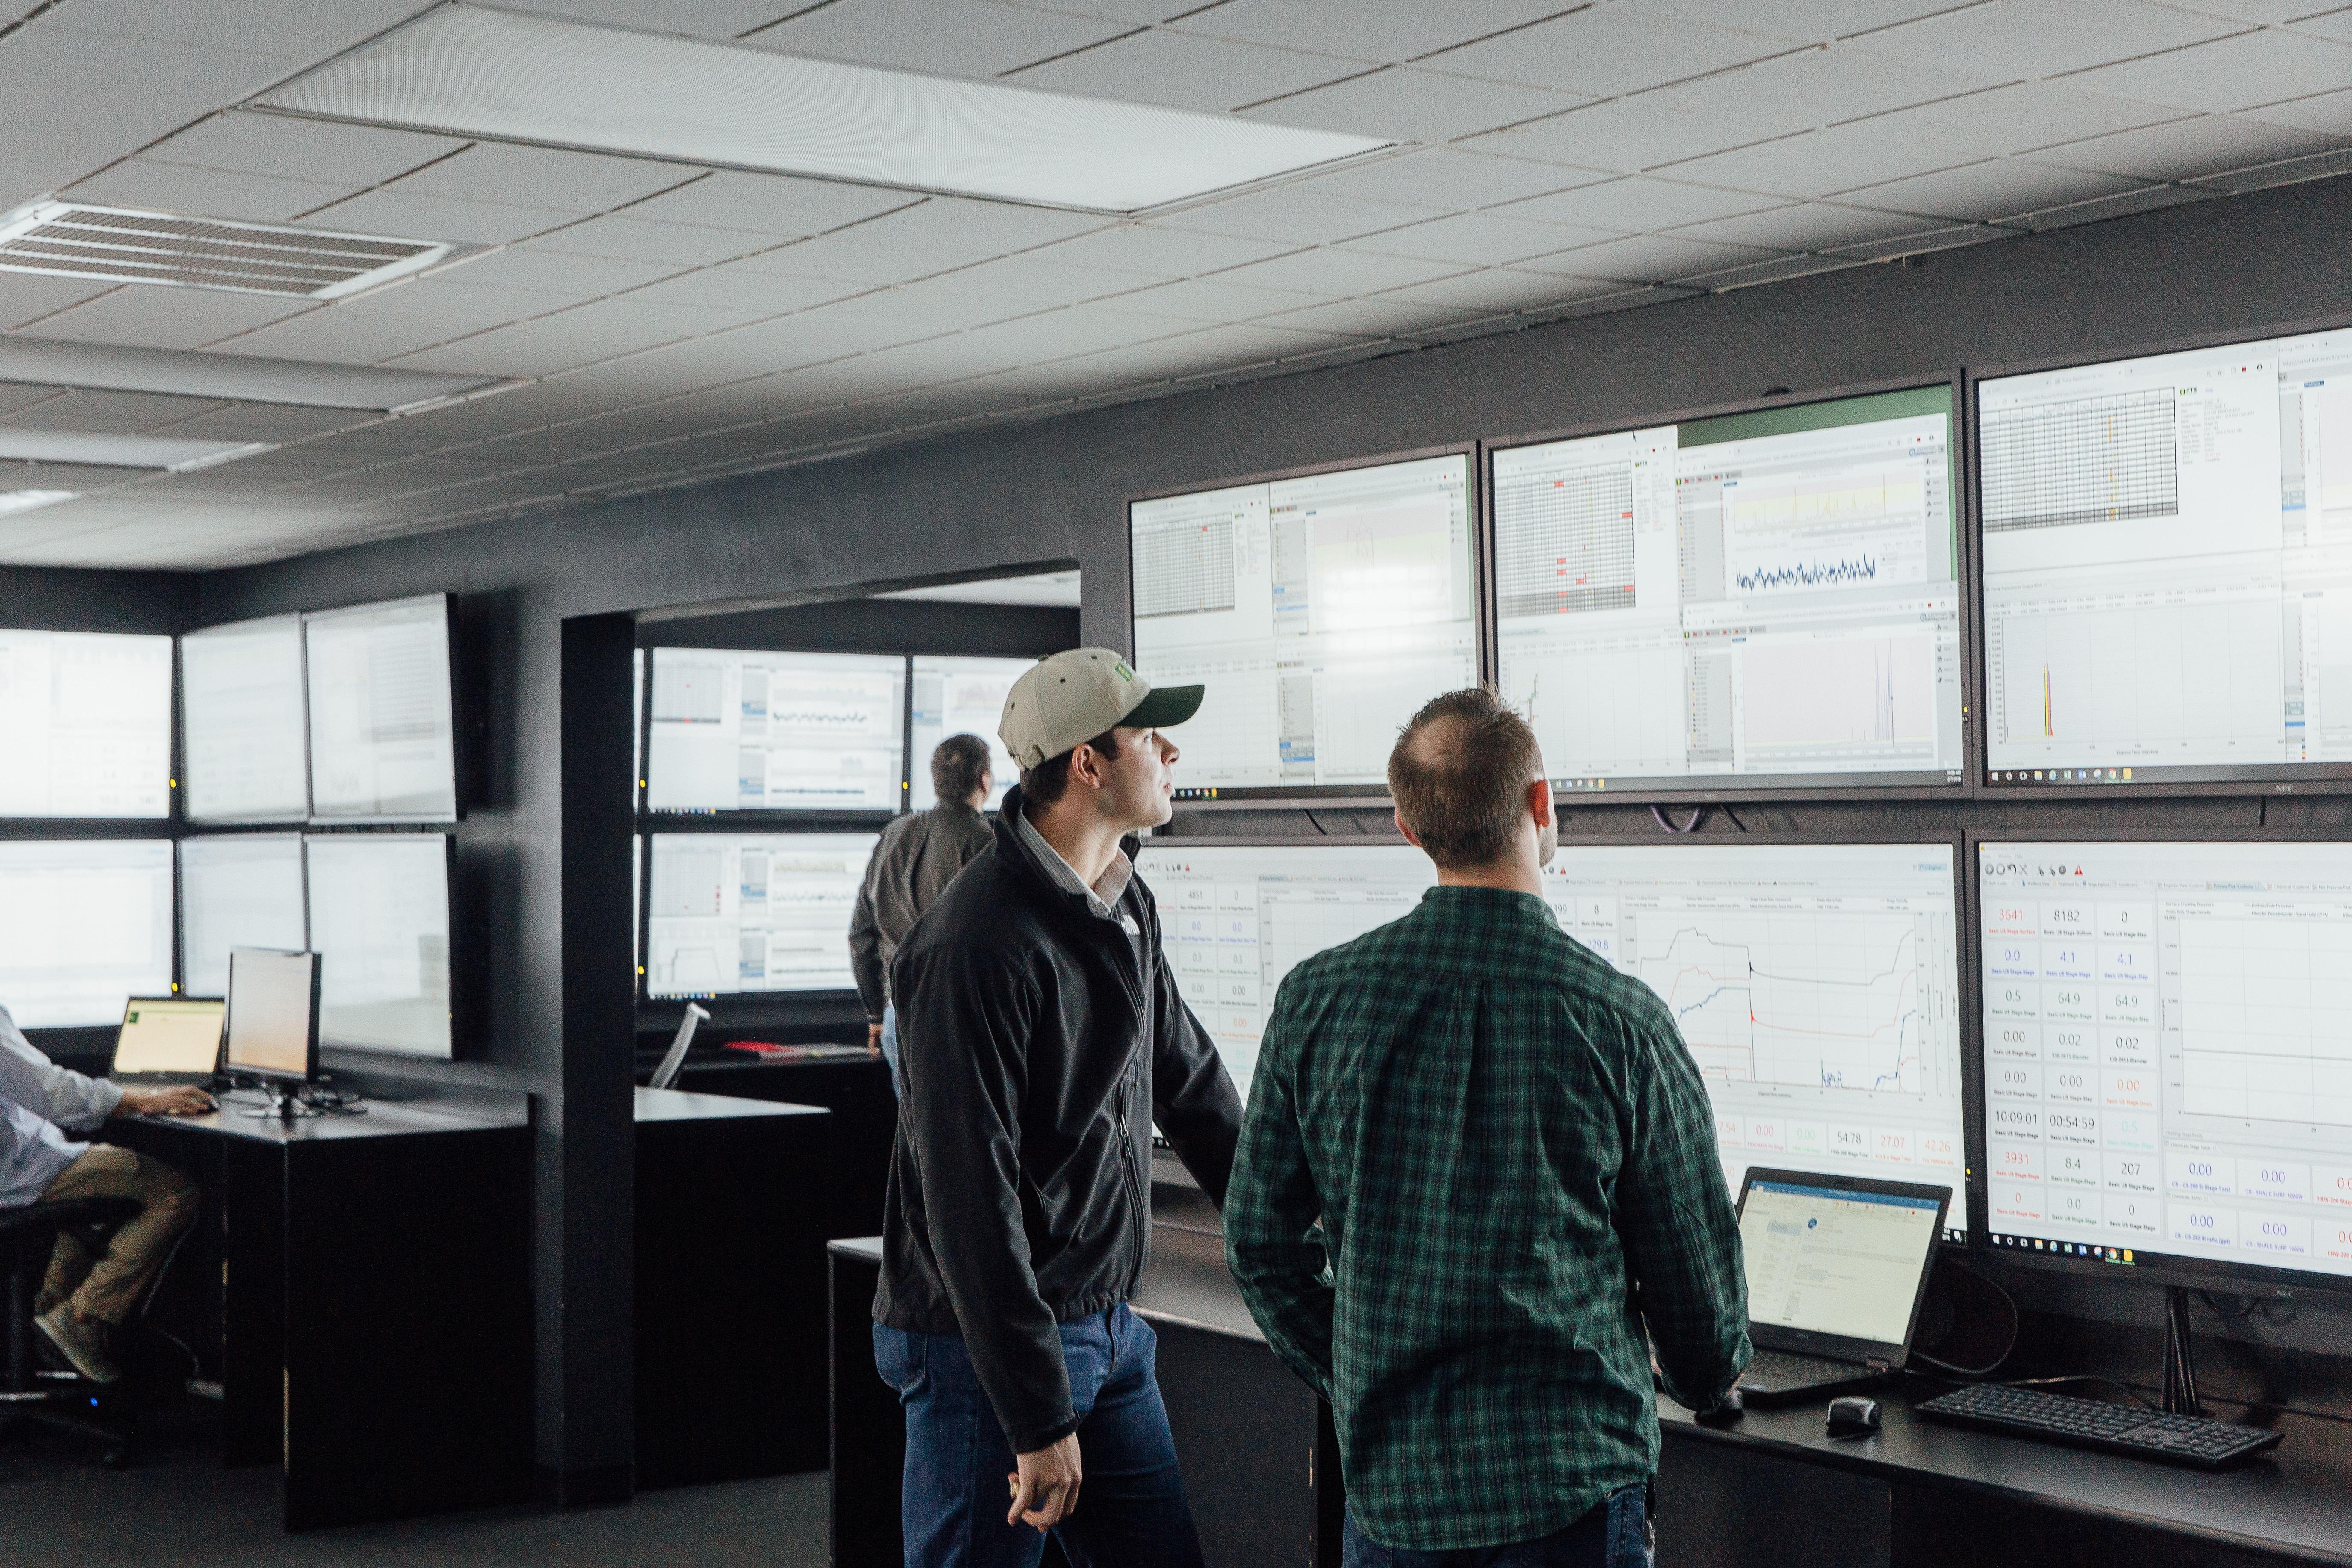 Operations technology utilizes real-time analytics to improve communications.